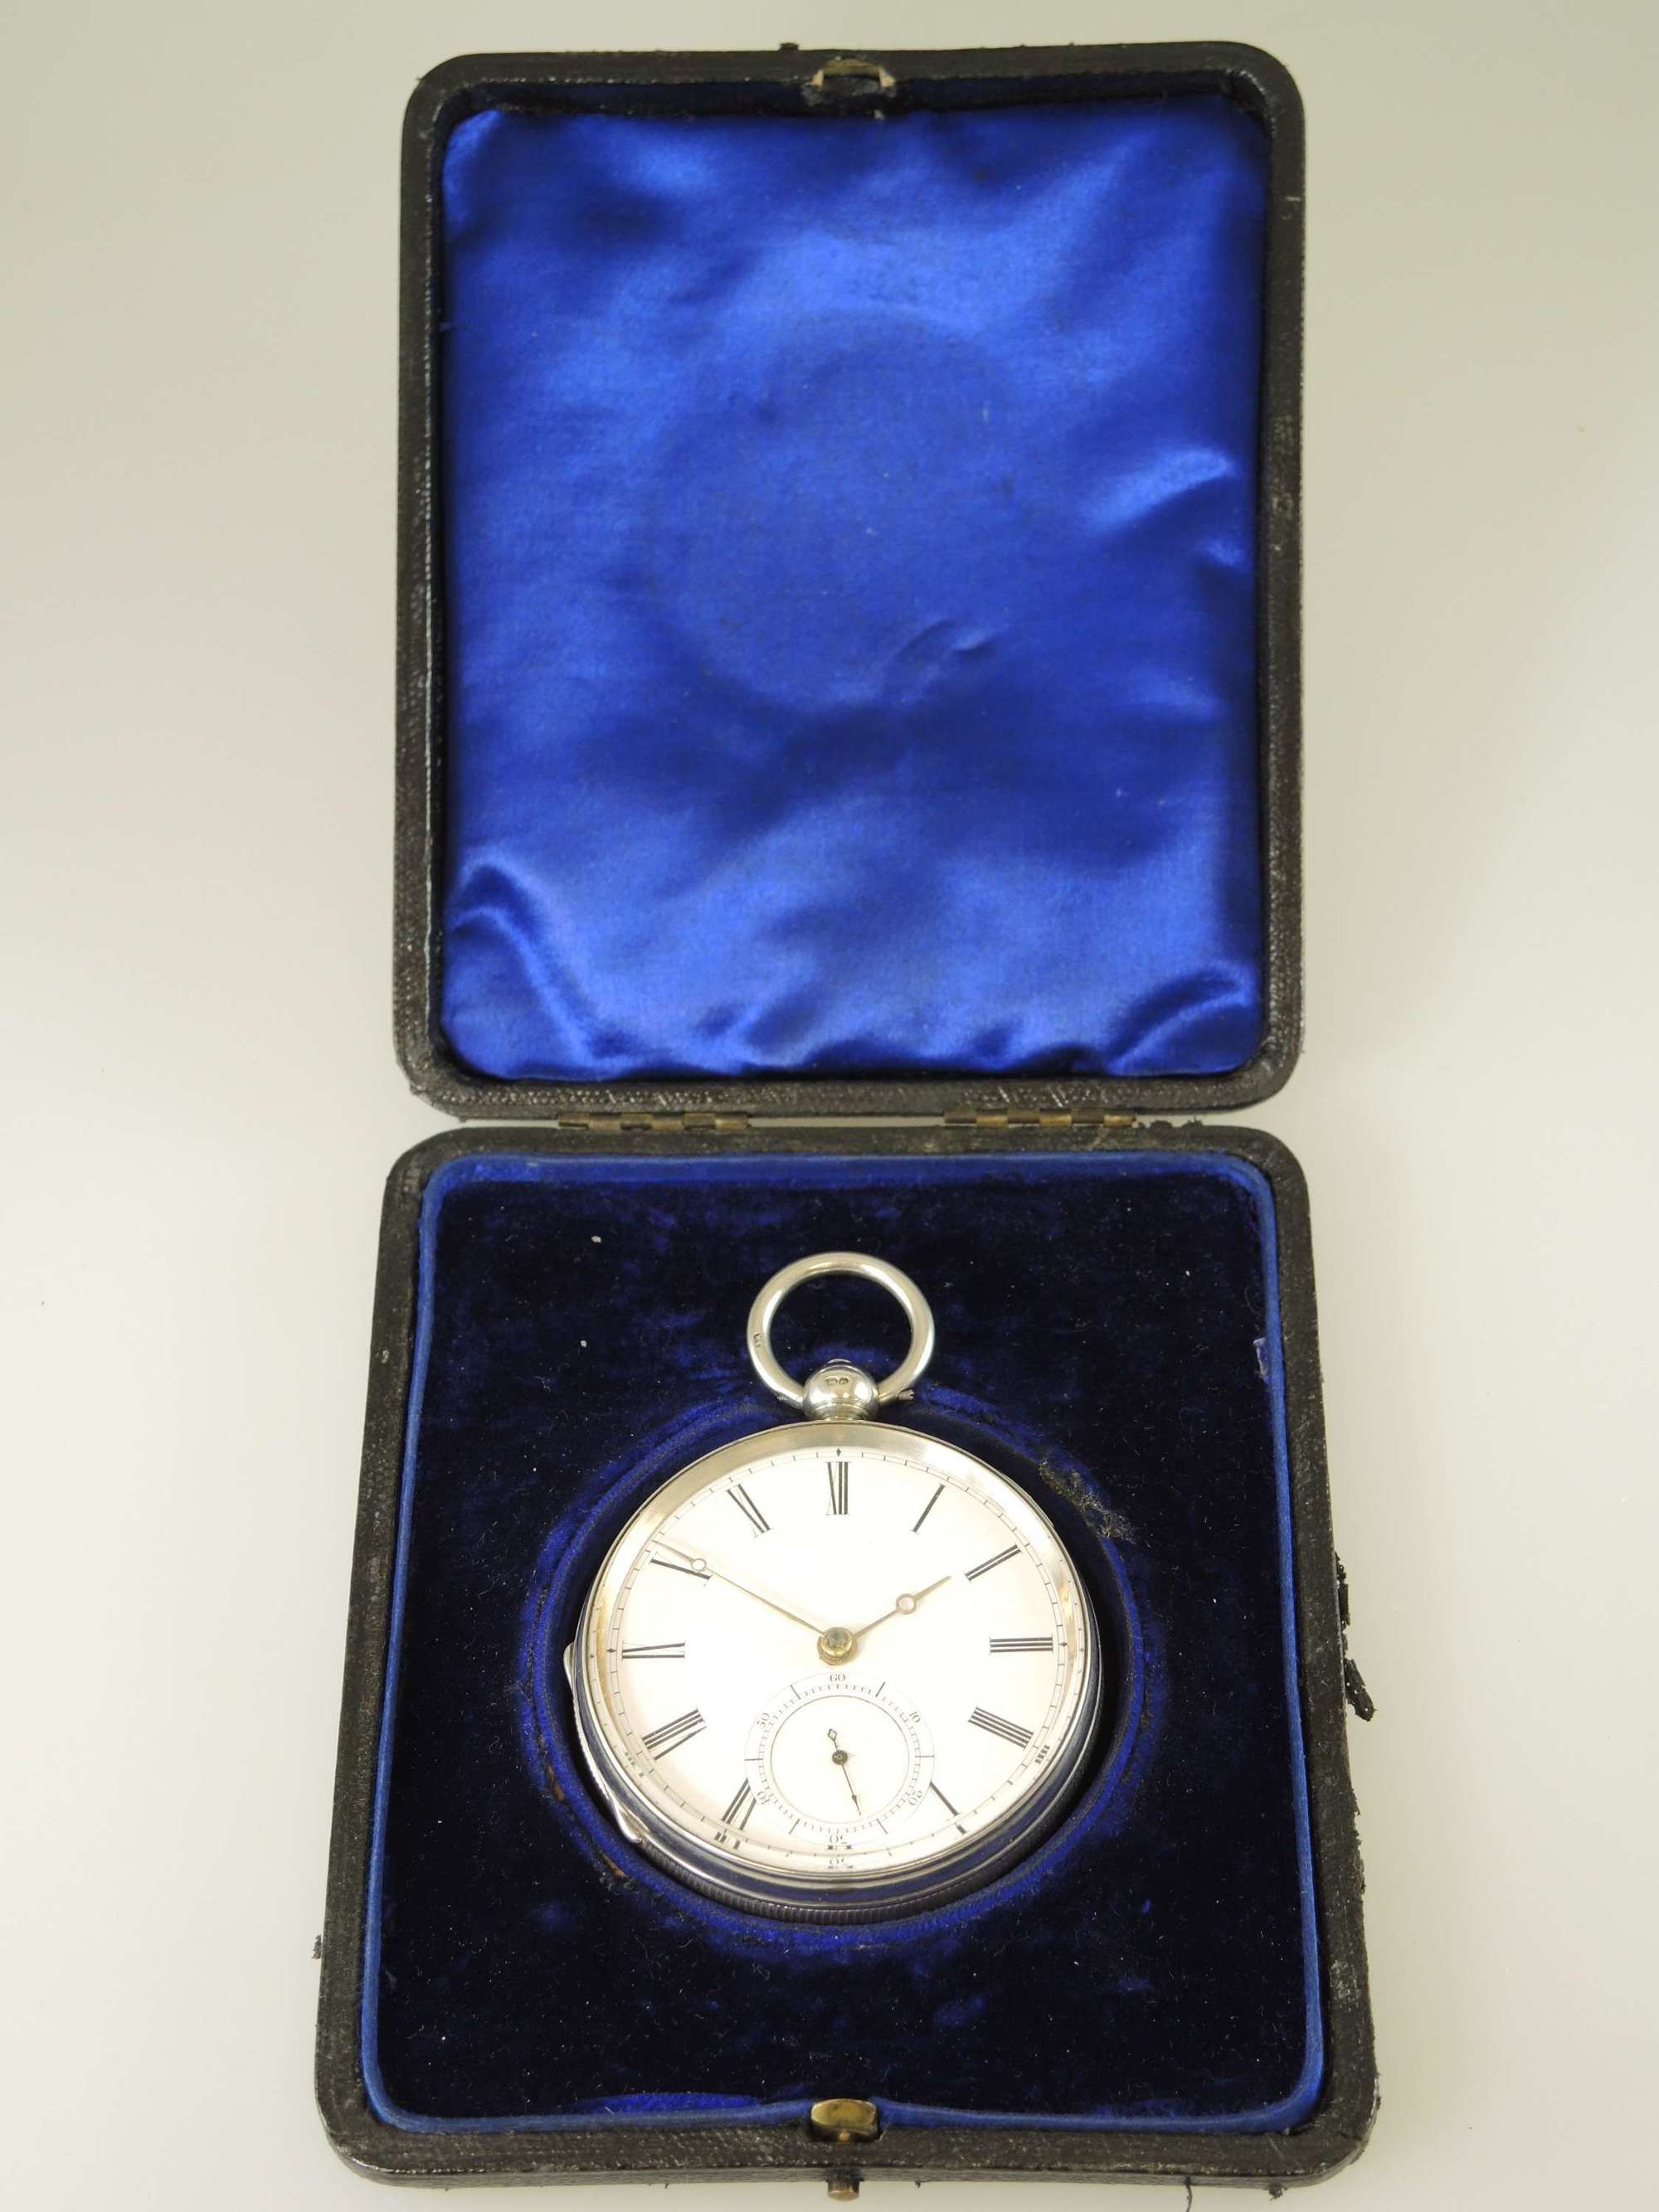 Pristine large English silver fusee by Adams, London 1892